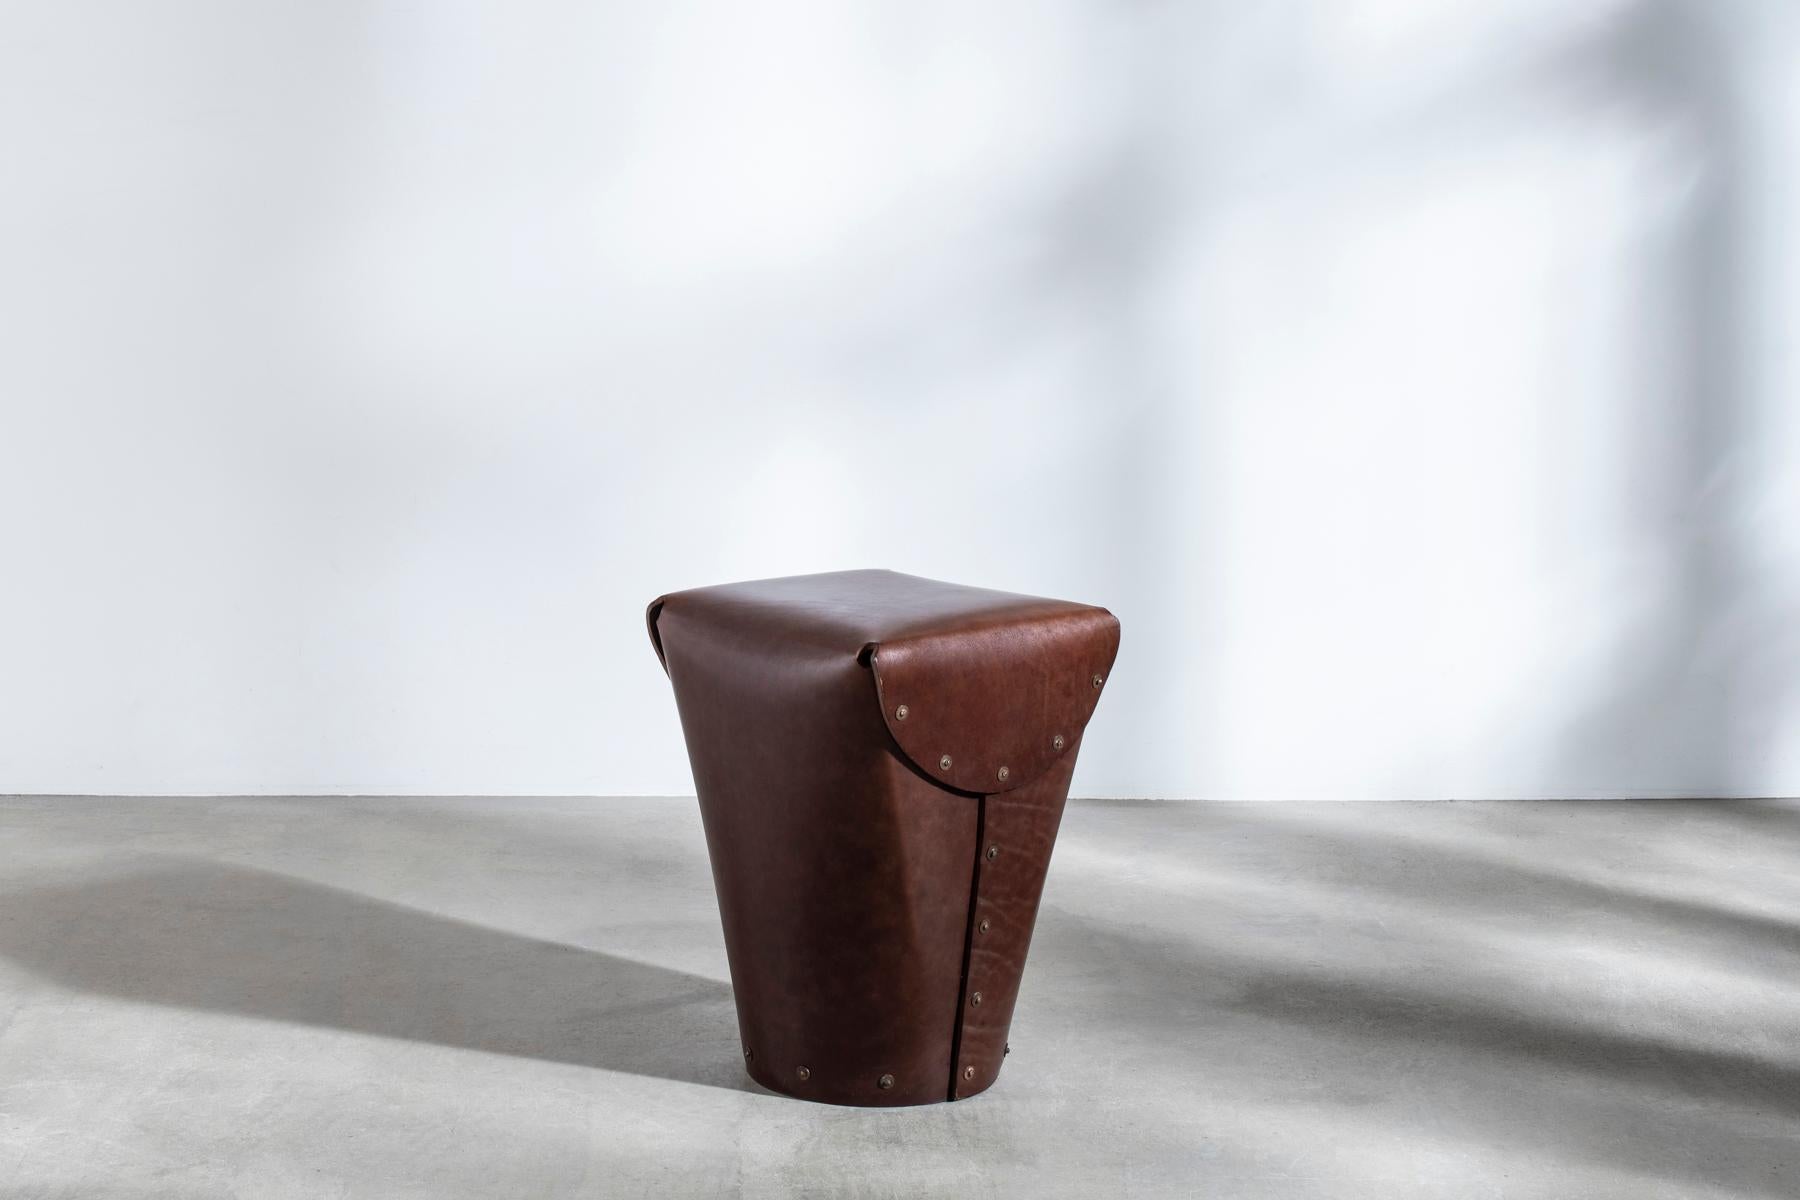 Hand-Crafted Rivet Stool II by Bill Amberg, bridle leather stool with hand-set copper rivets For Sale